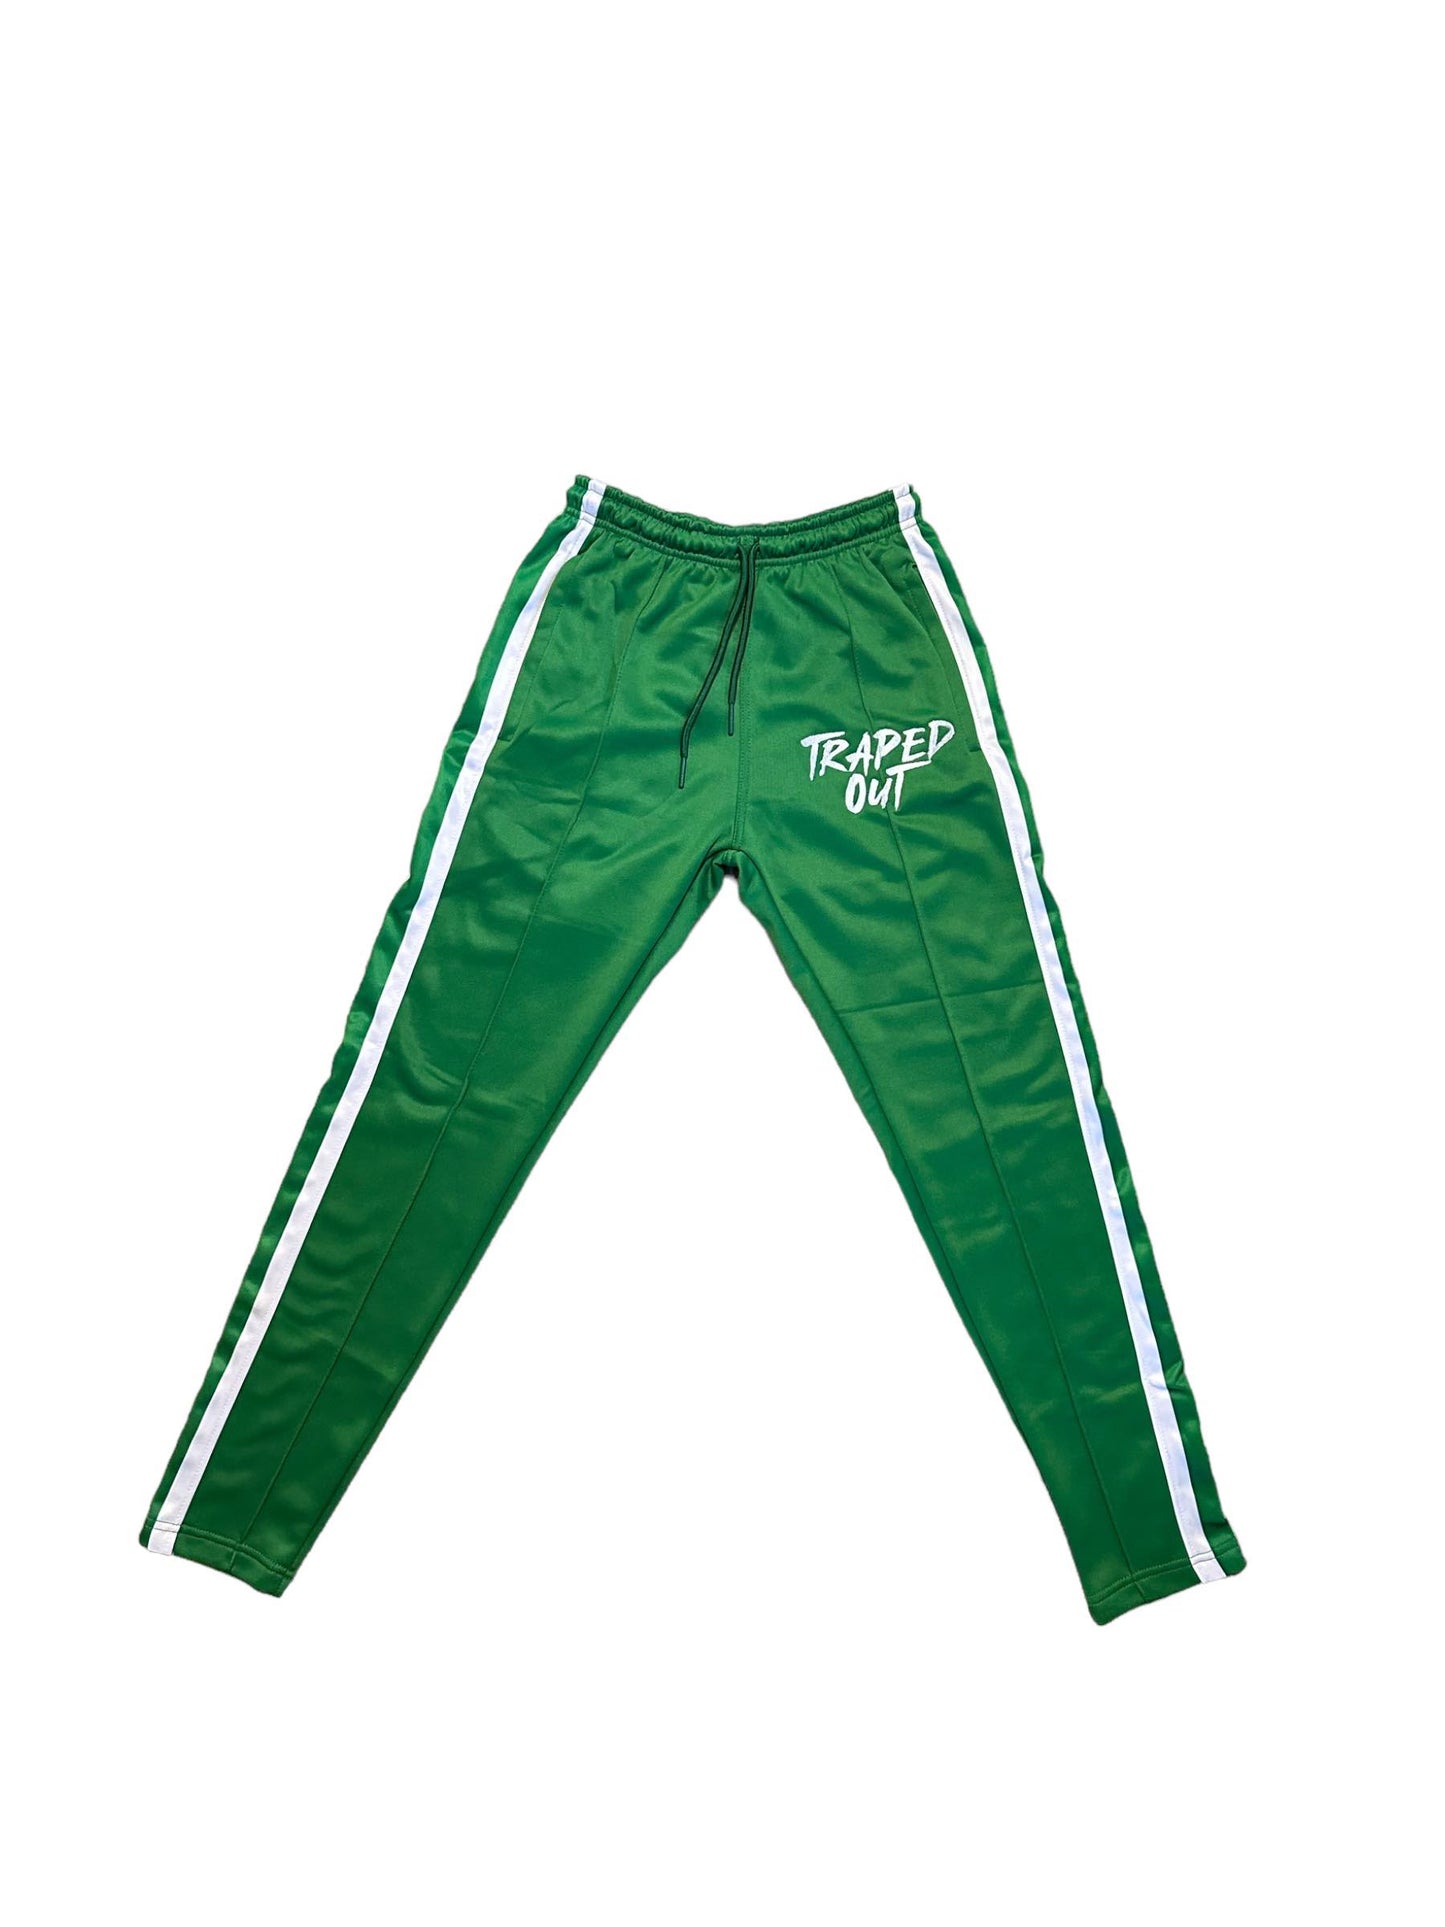 Green and White Track Pants